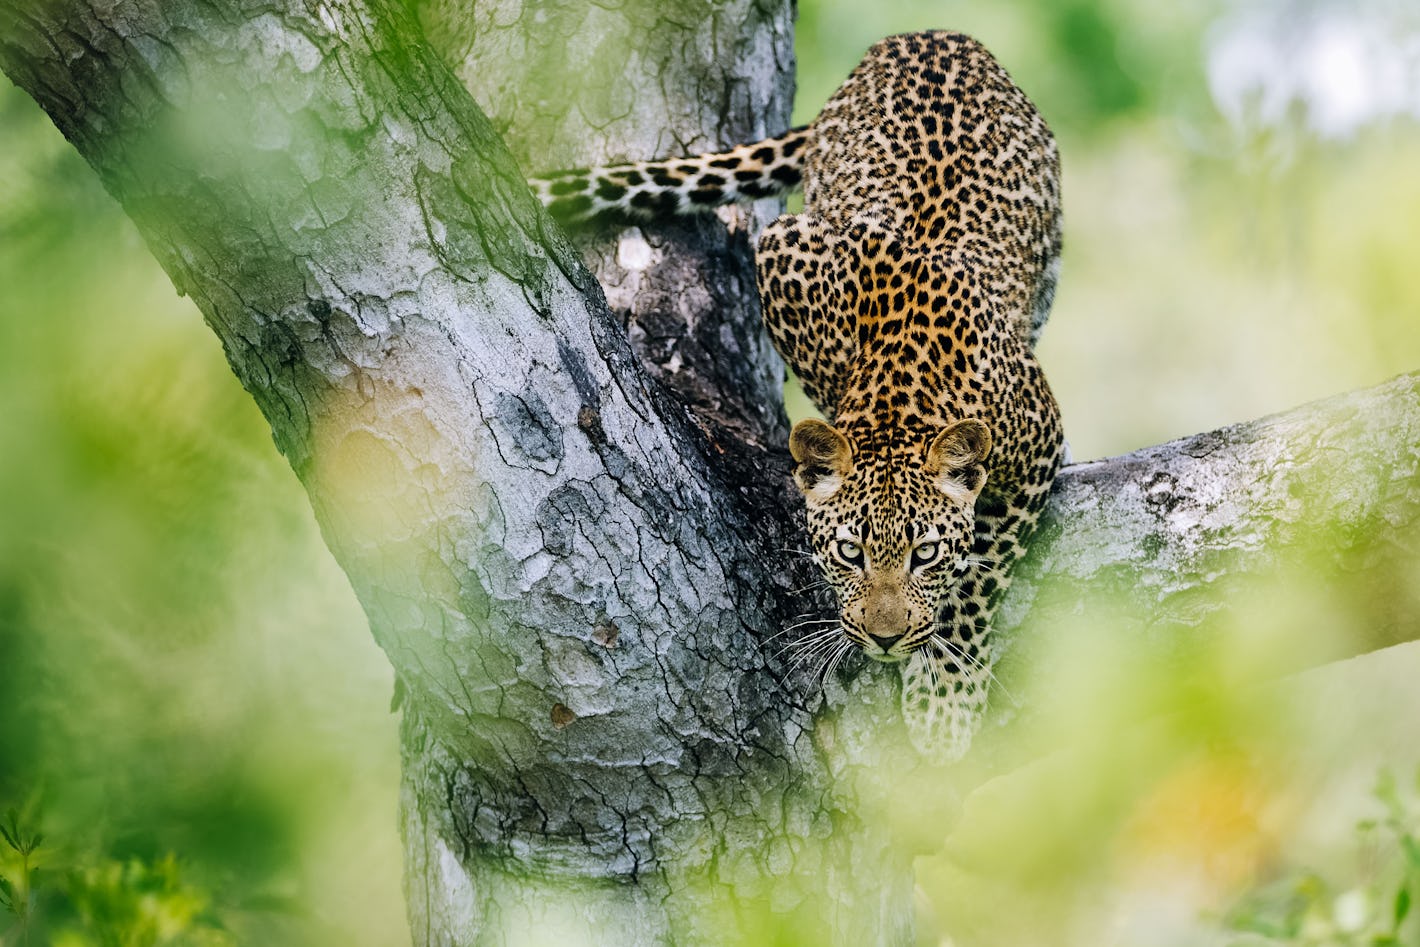 Search for Krugers's elusive leopards | Timbuktu Travel